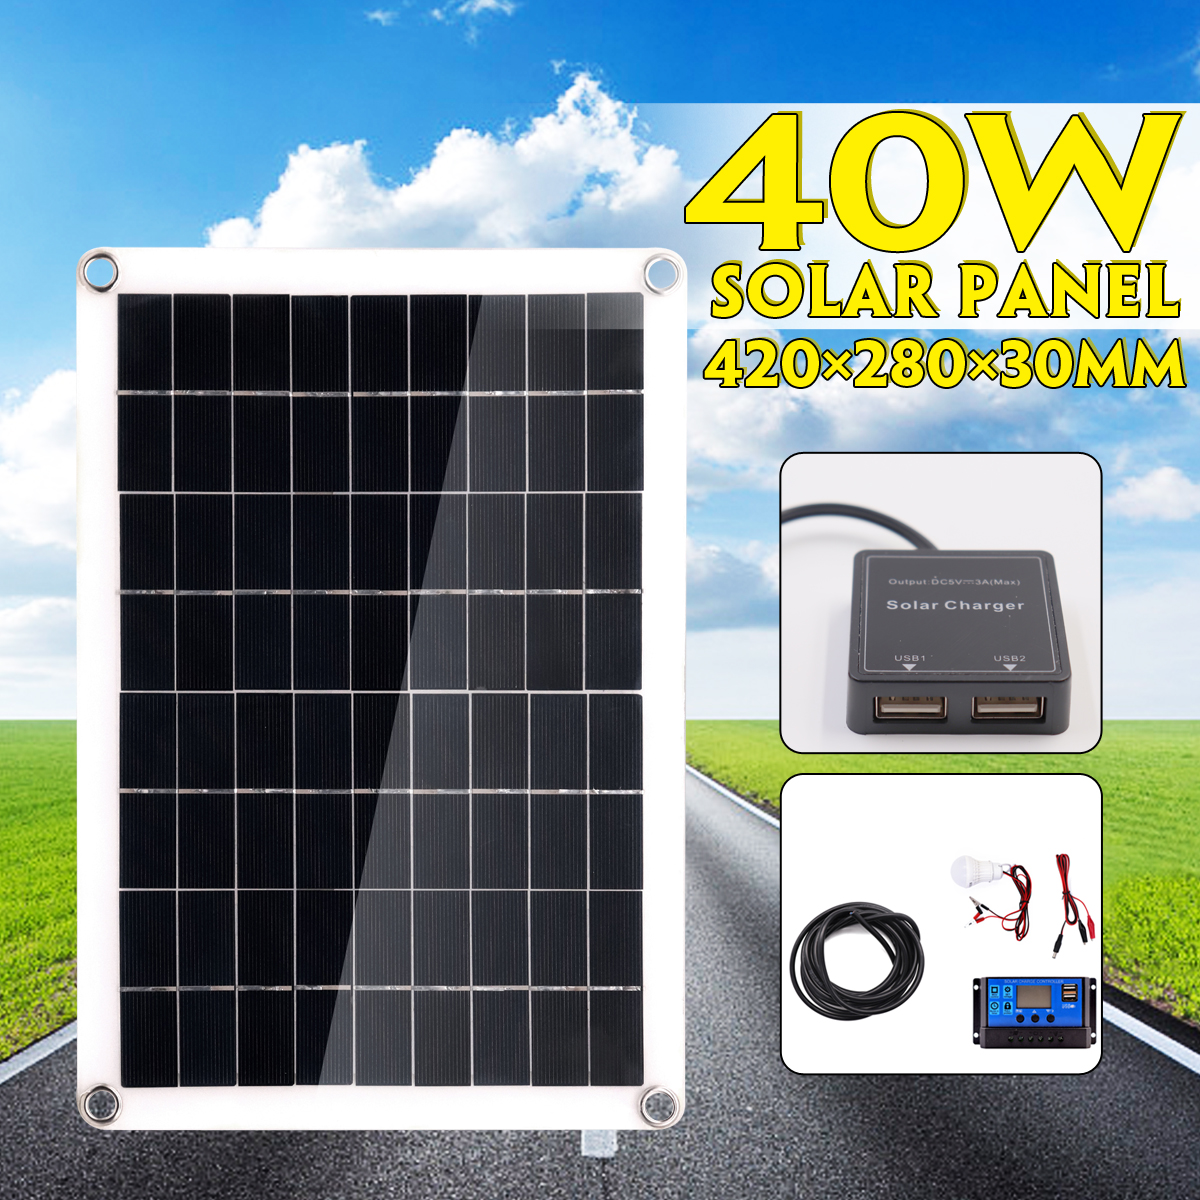 40W Solar Panel +3W Lamp +10A Solar Controller +1m Extension Cord Set for Camping Home Working